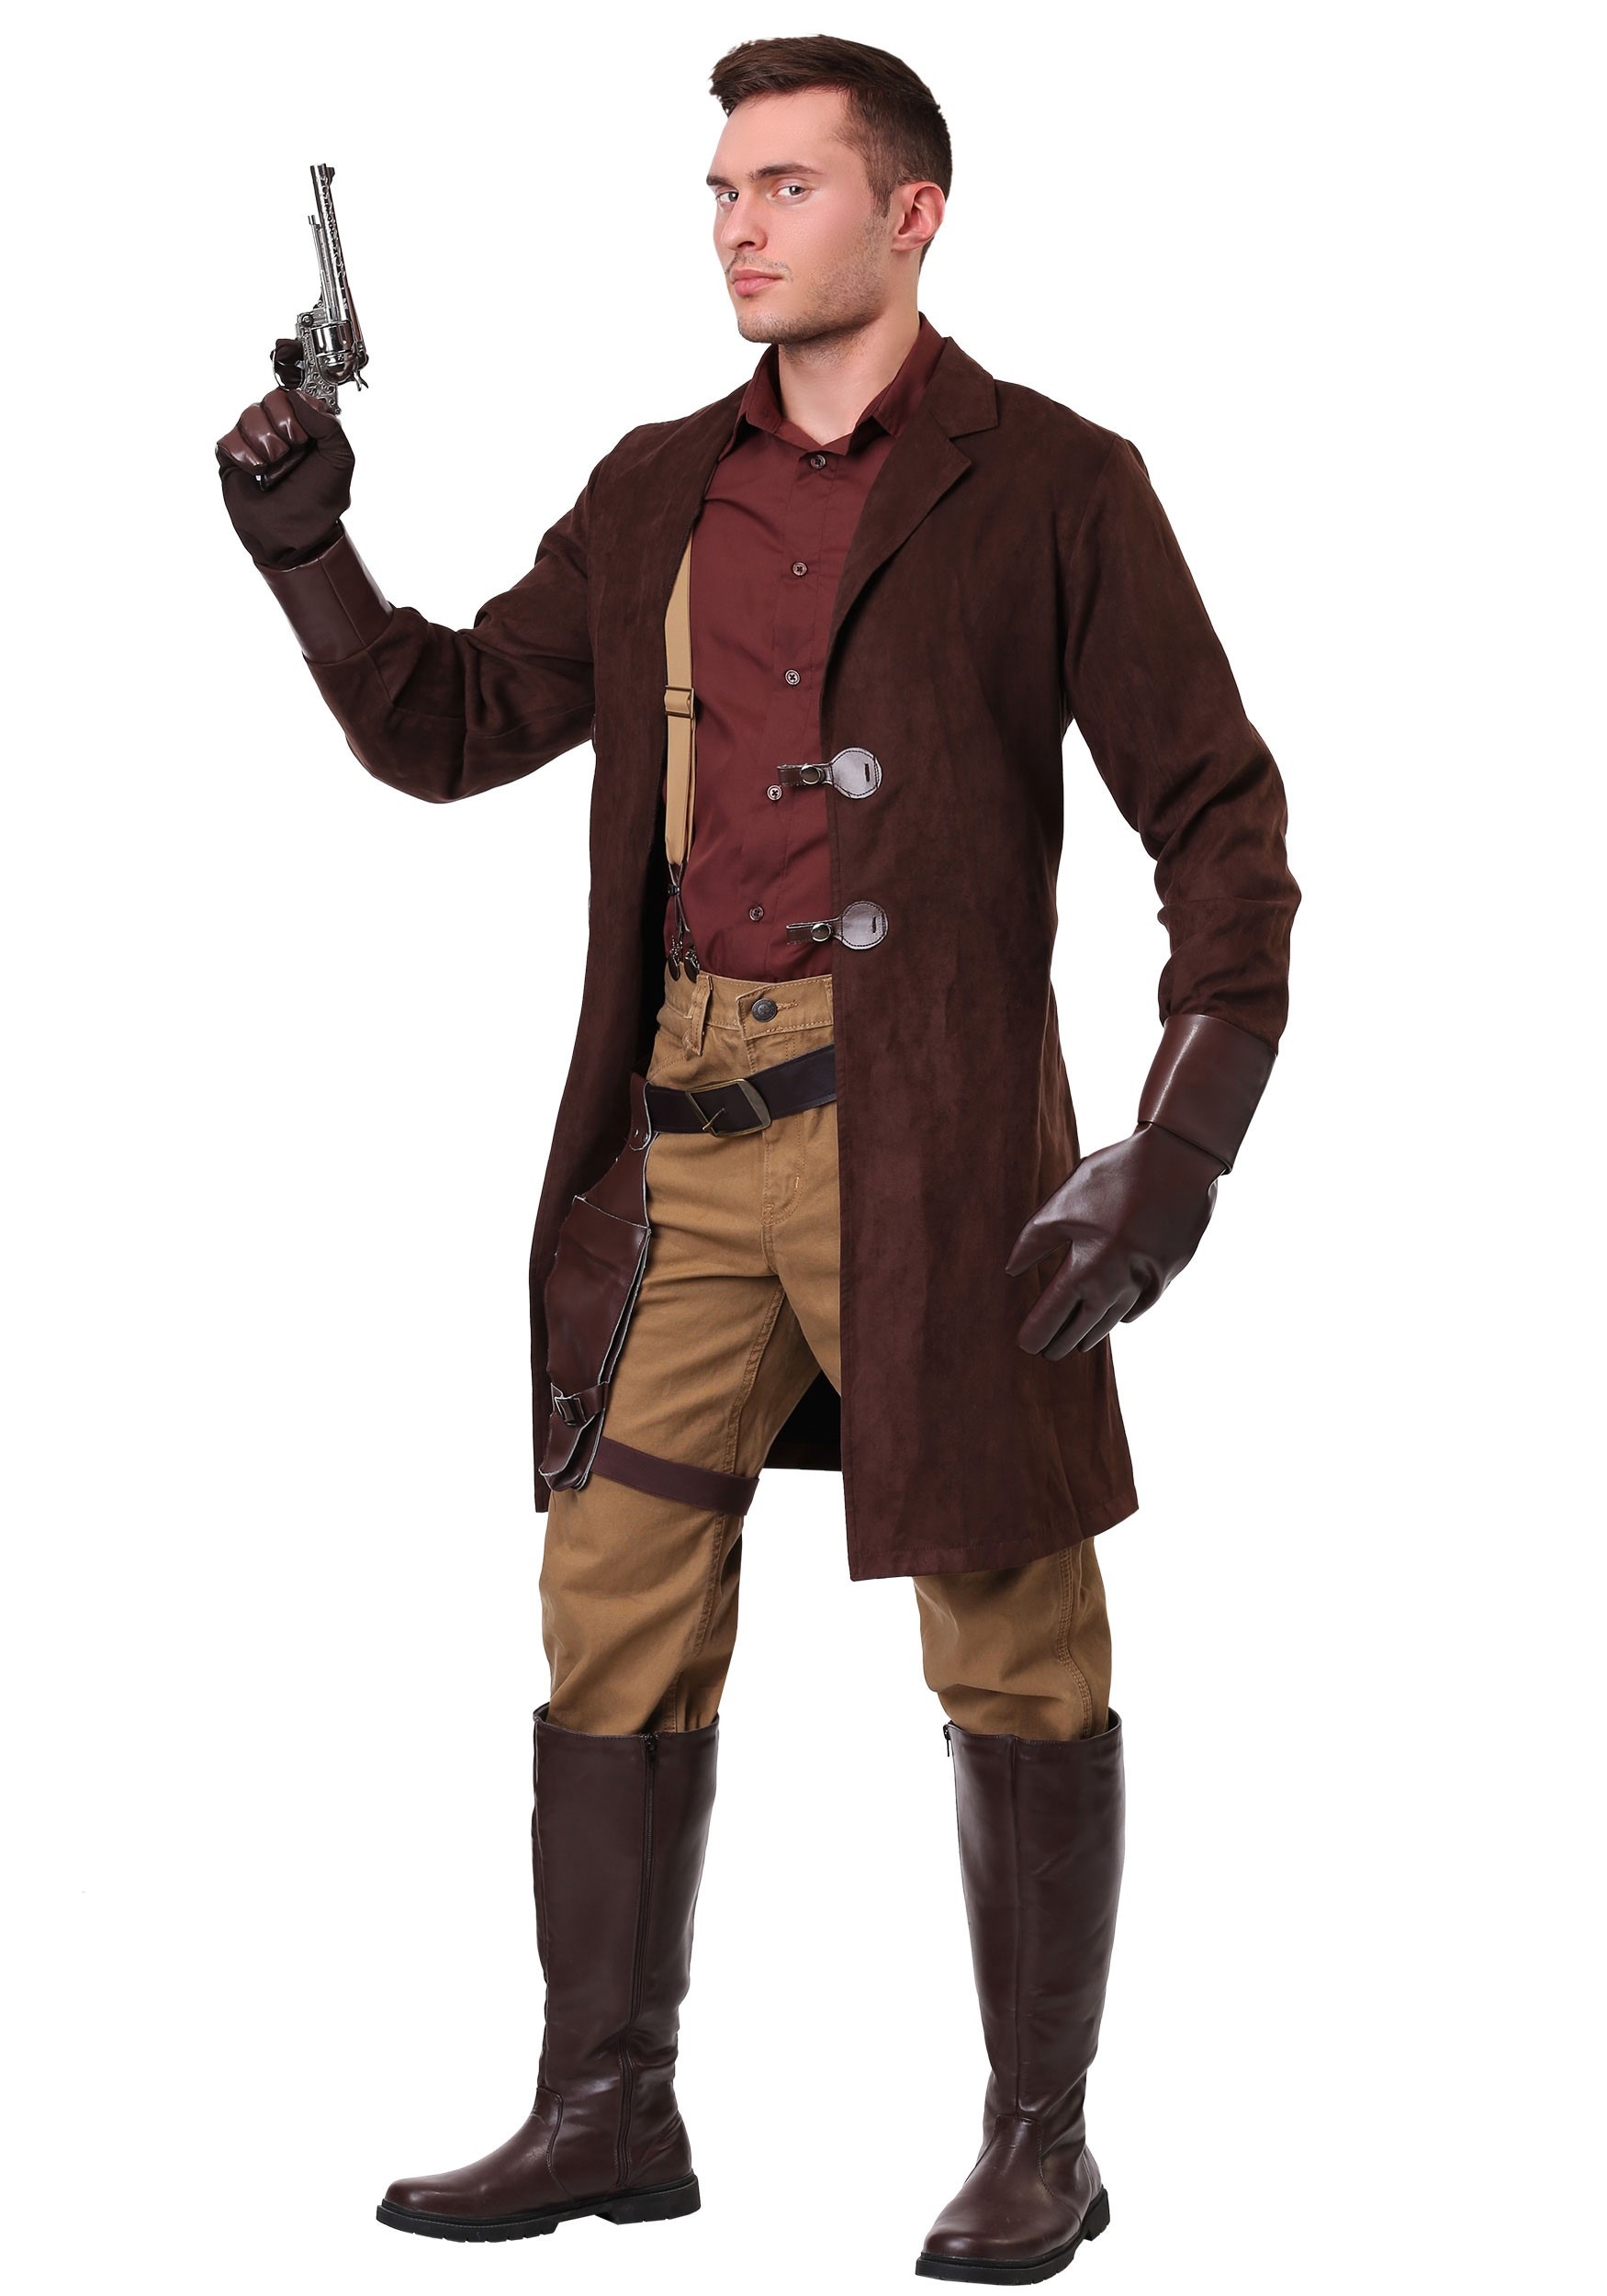 Image of Firefly Malcolm Reynolds Plus Size Costume for Men ID FUN6955PL-2X